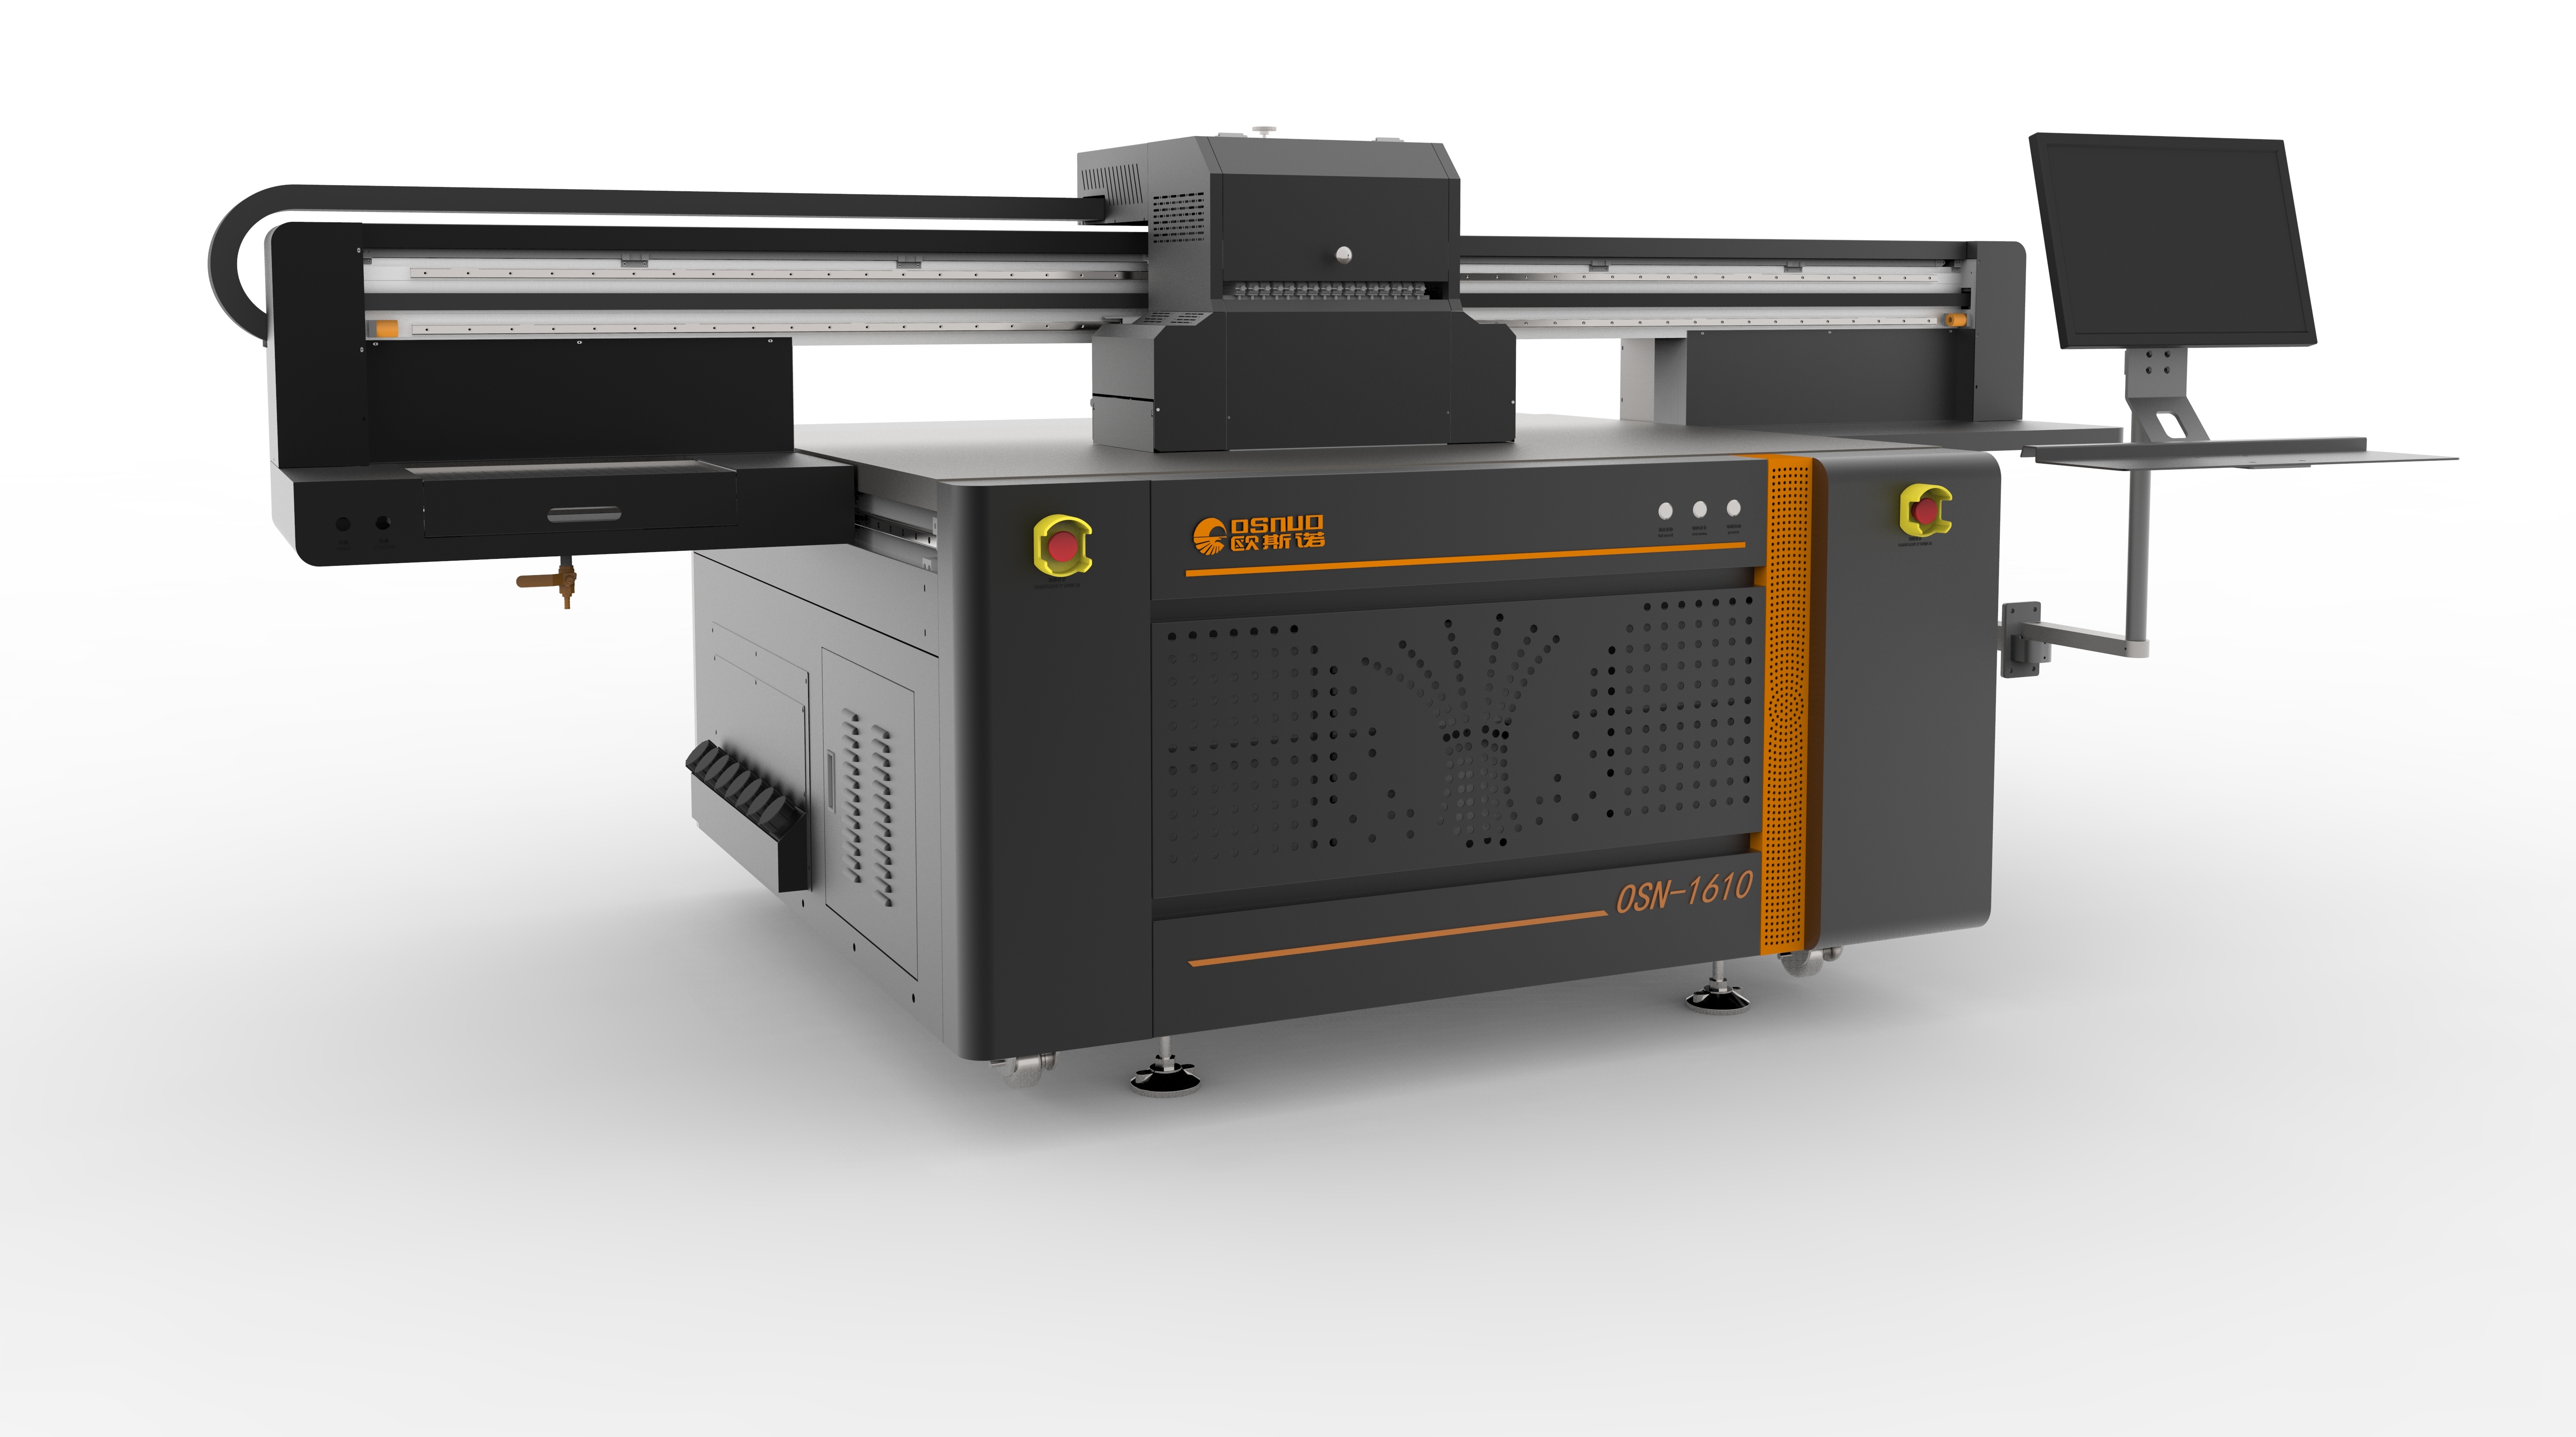 The Ultimate CCD Camera Scan UV Flatbed Printer for High-Precision Printing